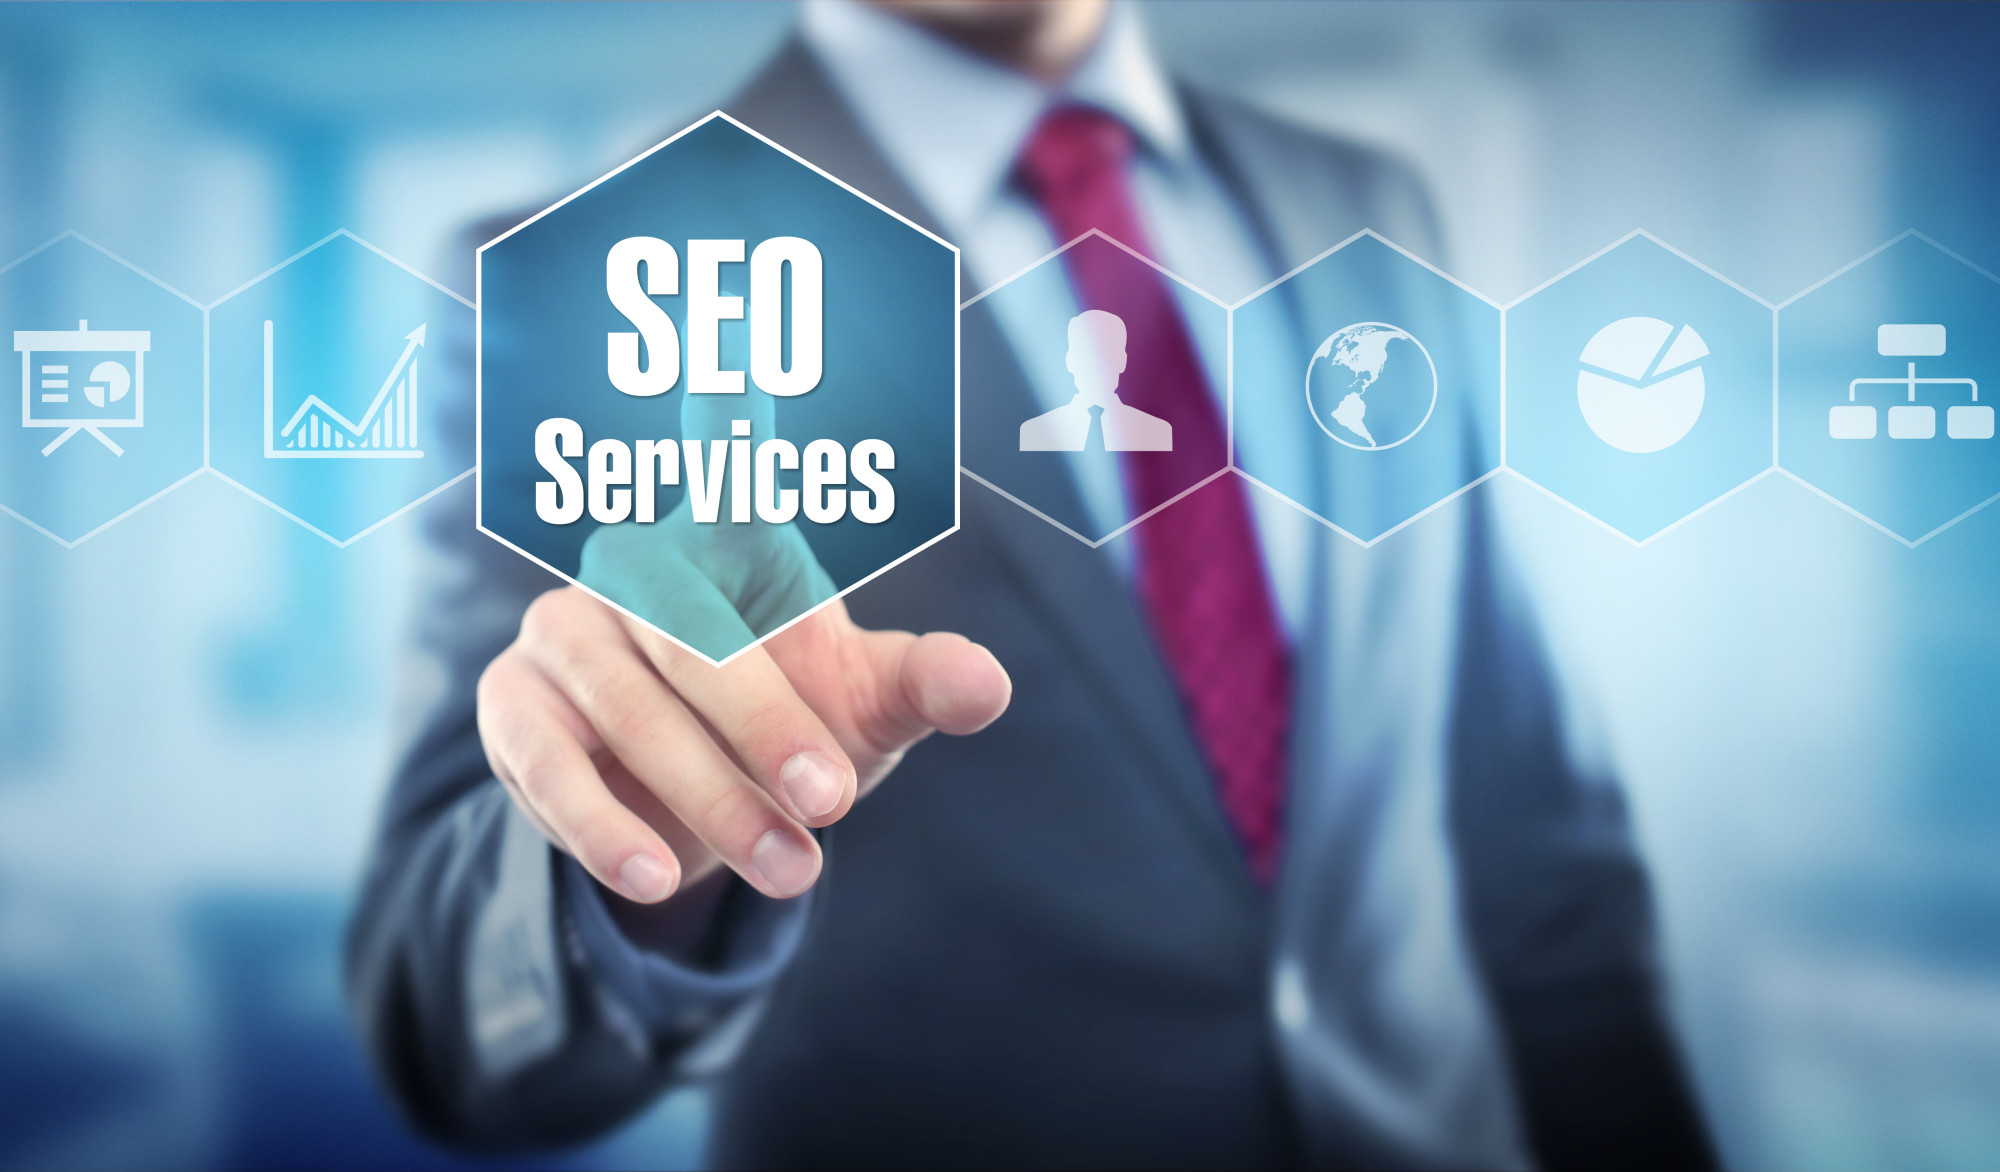 5 Crucial SEO Tips for Small Businesses (#4 is Vital!)